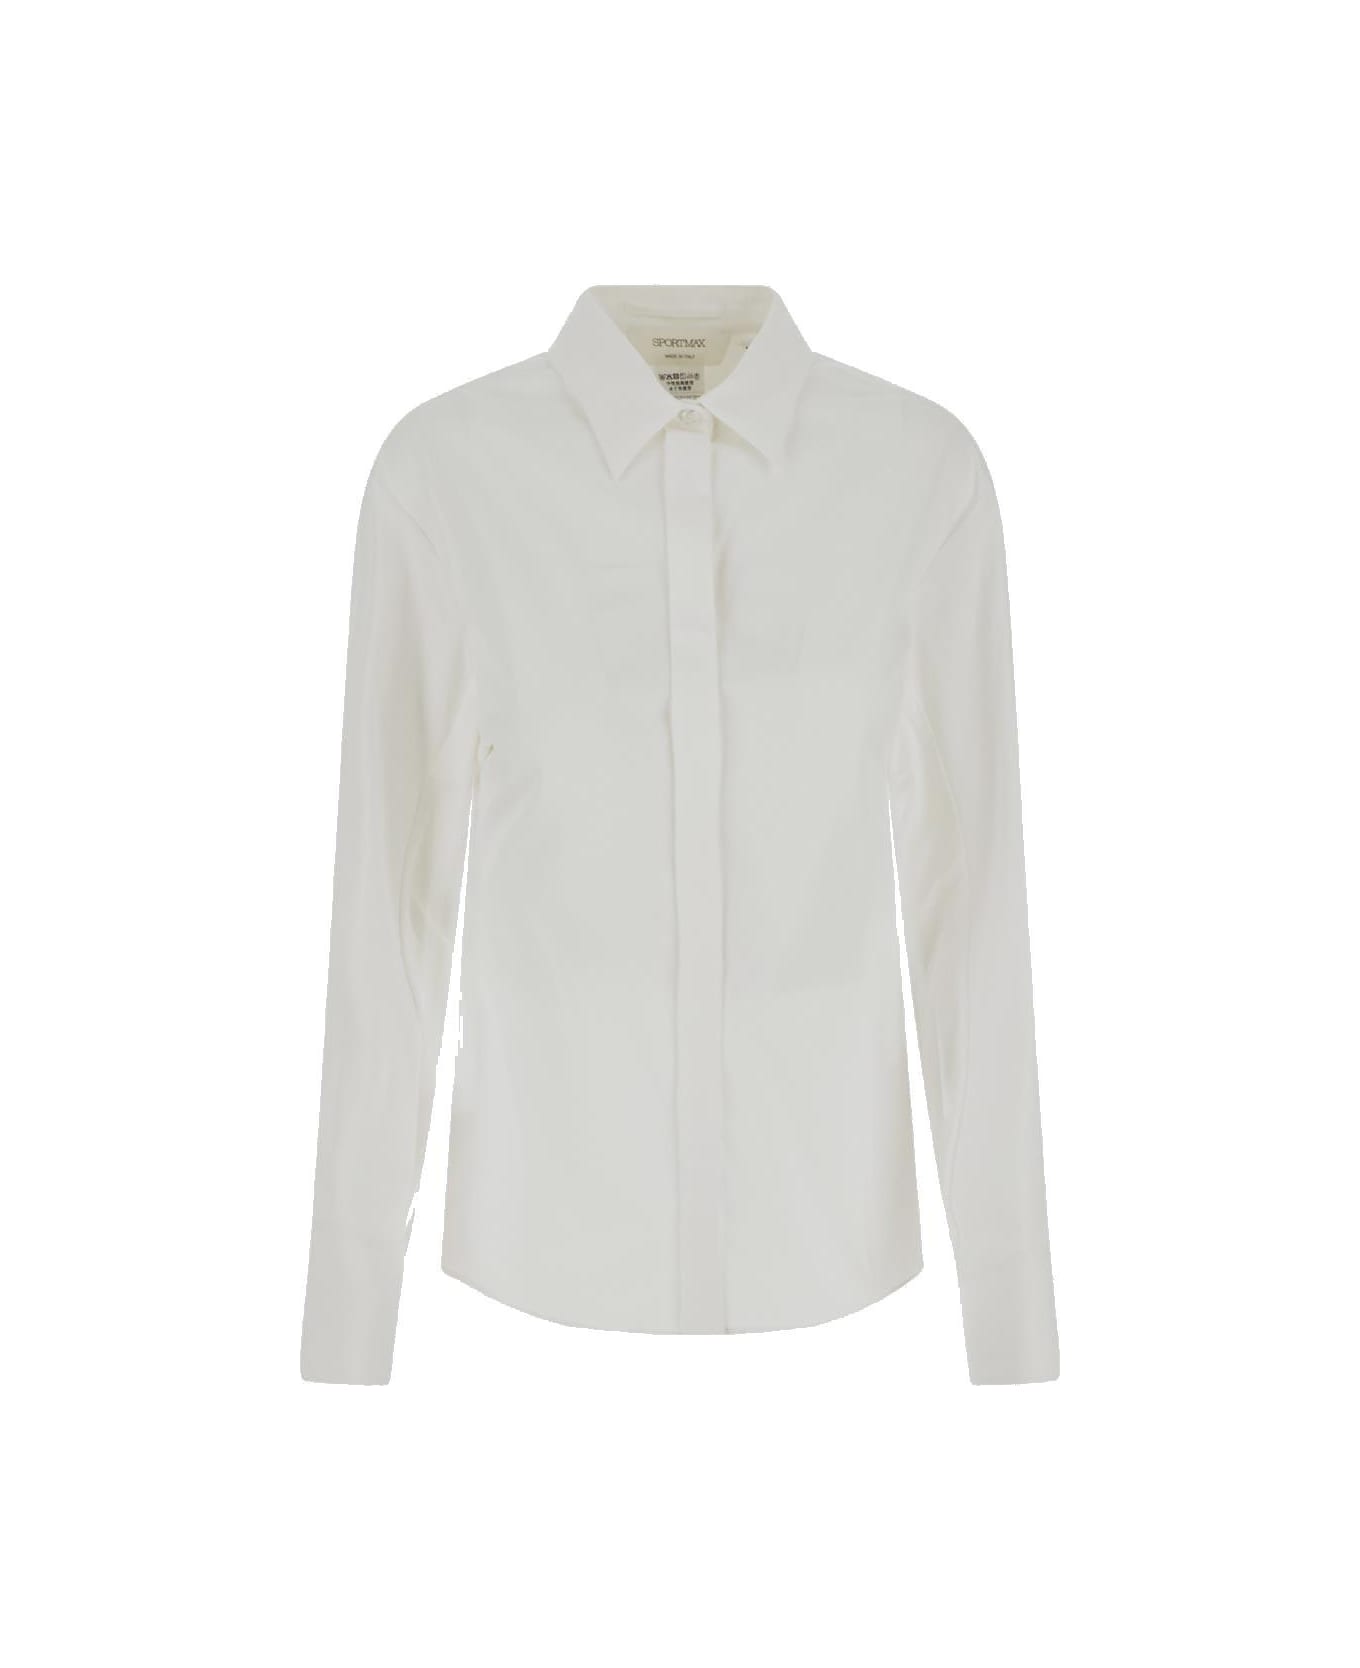 SportMax Button-up Long Sleeved Shirt - WHITE シャツ